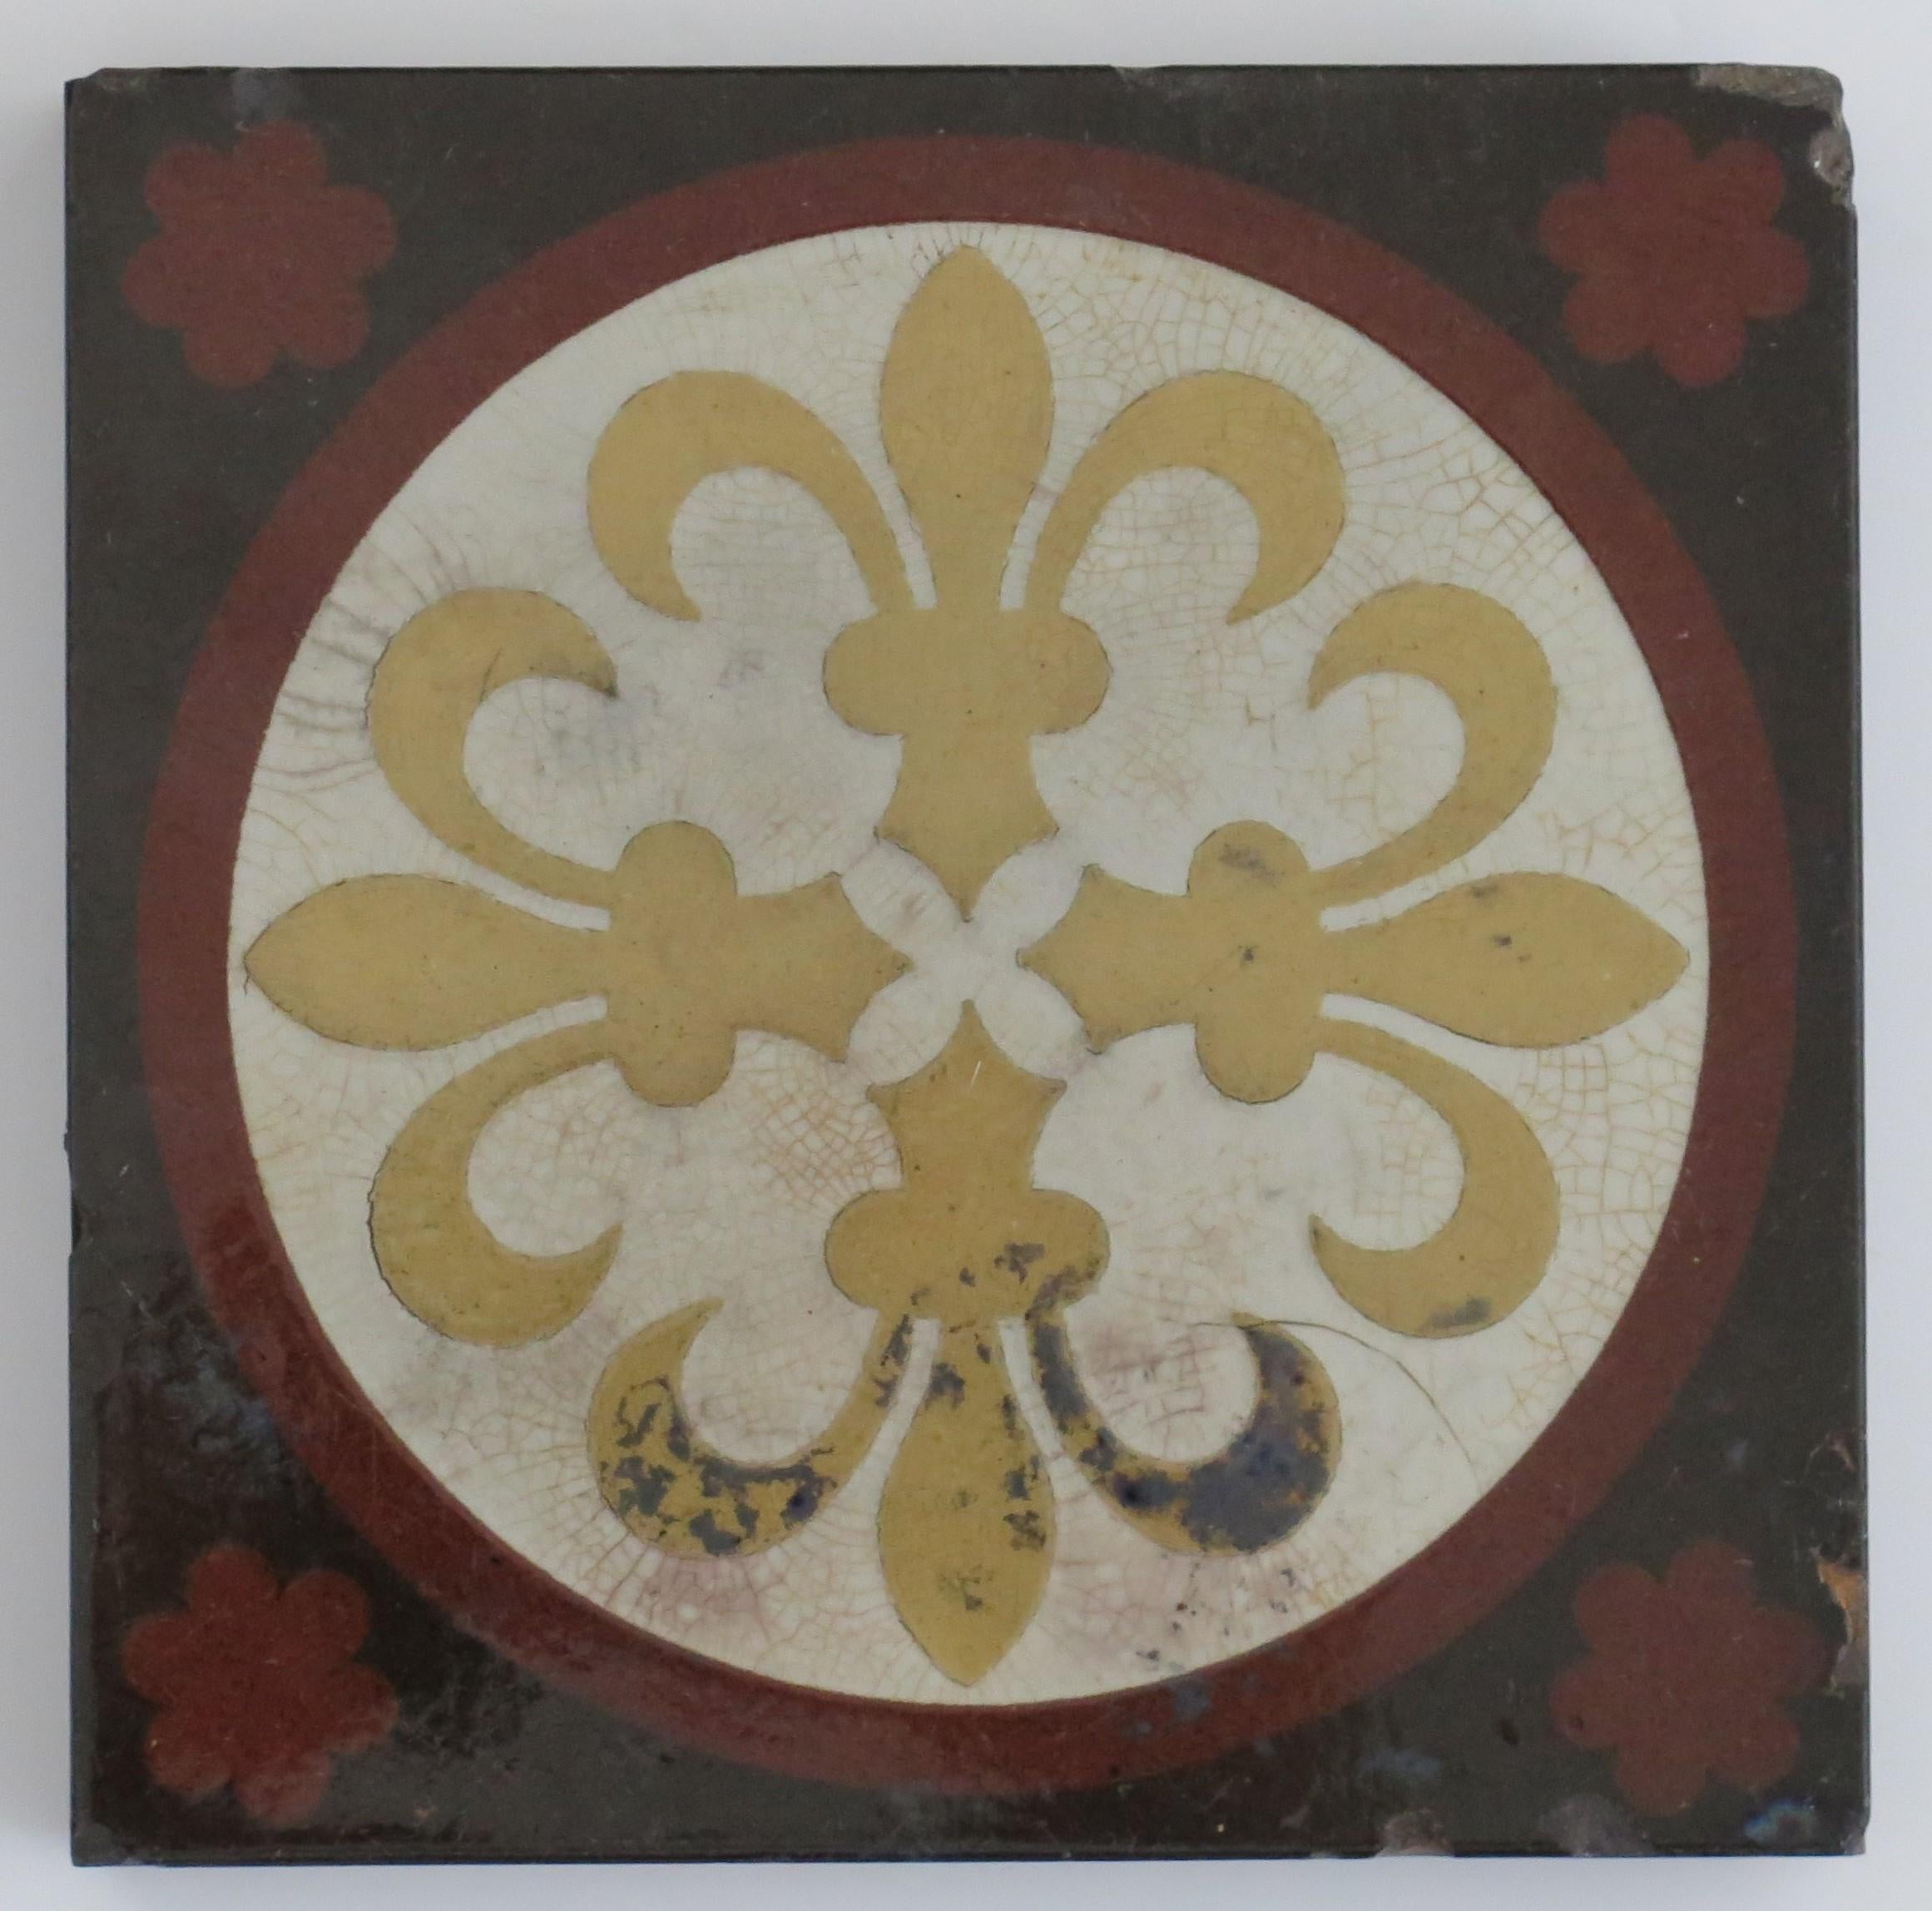 This is a very decorative encaustic ceramic tile made by William Godwin, dating to the 19th century, circa 1870. 

This tile may have been originally made as a floor tile. 

Dimensions; 6 x 6 x 0.85 inches.

This large tile is a beautiful